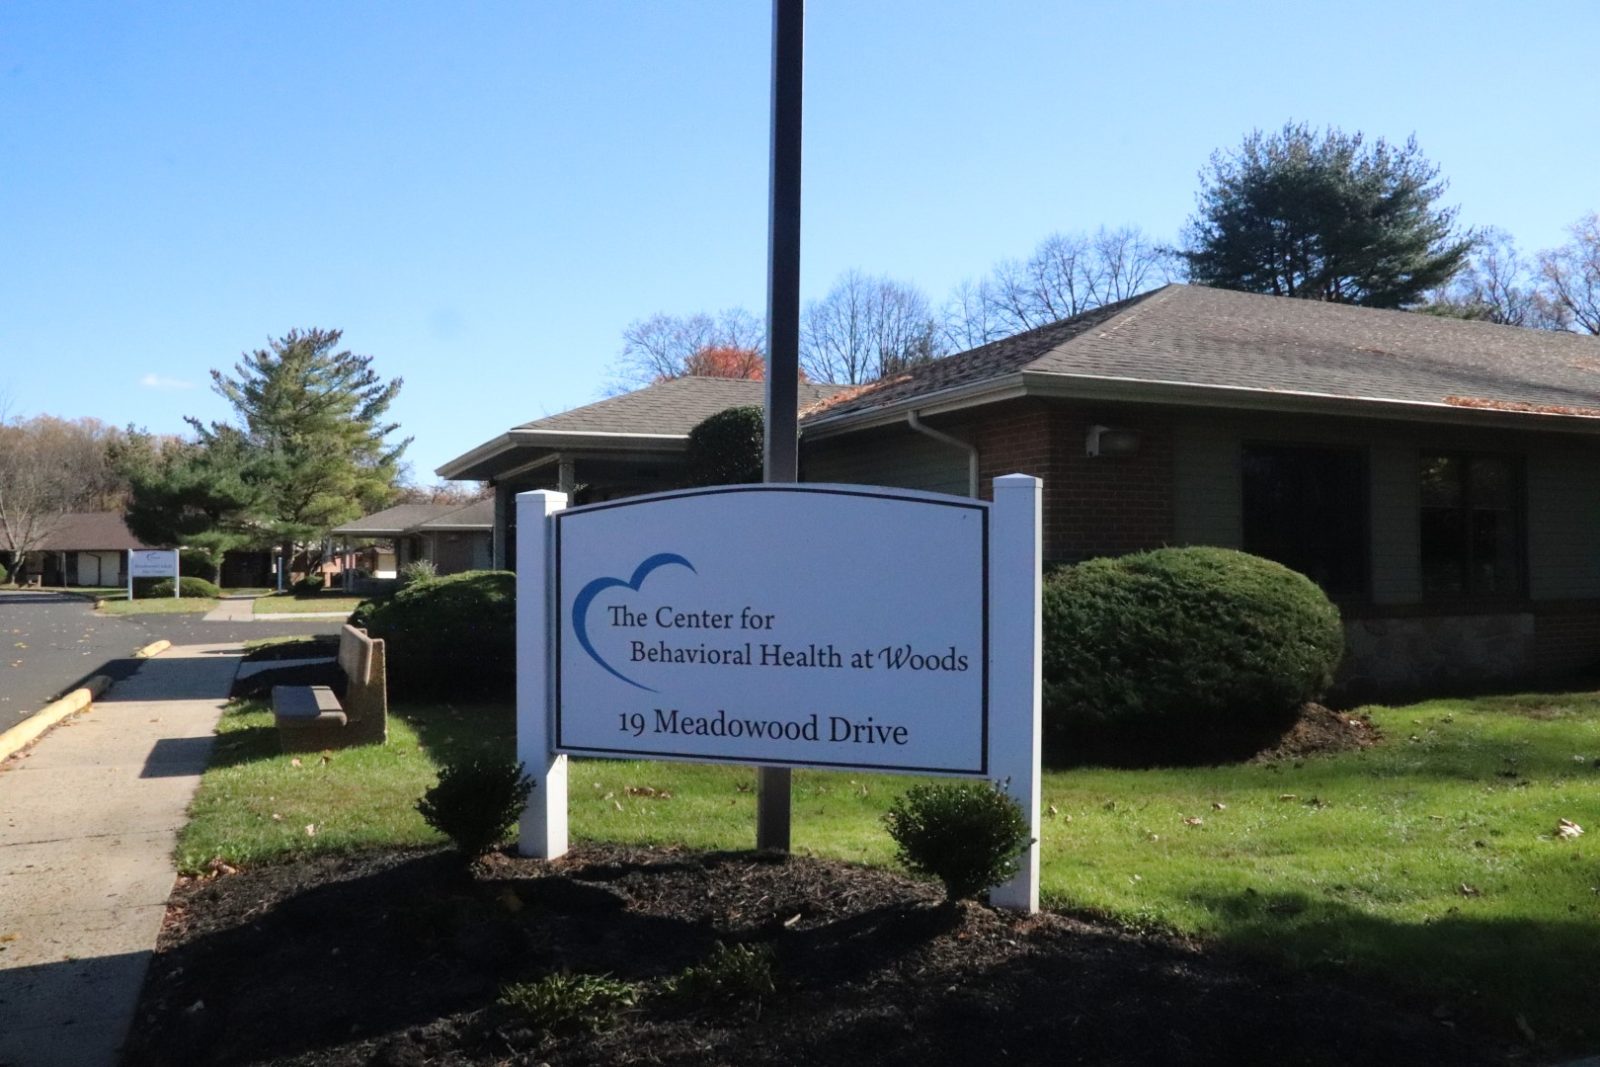 Photo of the entrance to the Center for Behavioral Health at Woods.